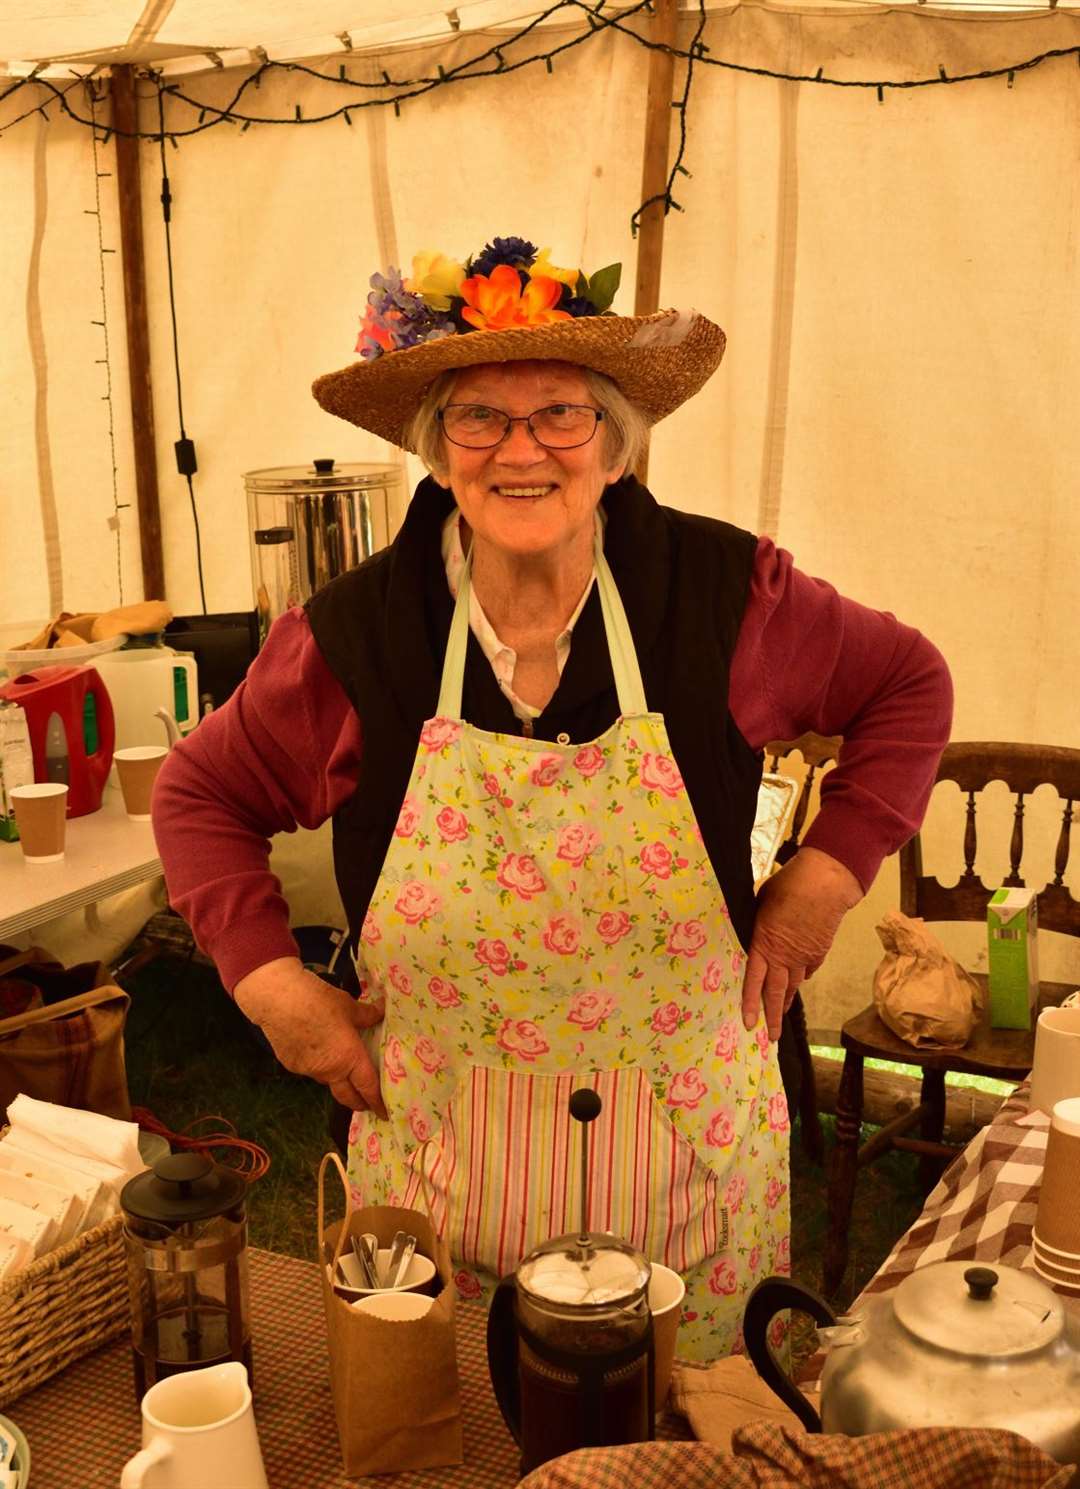 Anna Sutherland wore a glorious hat to serve the teas.